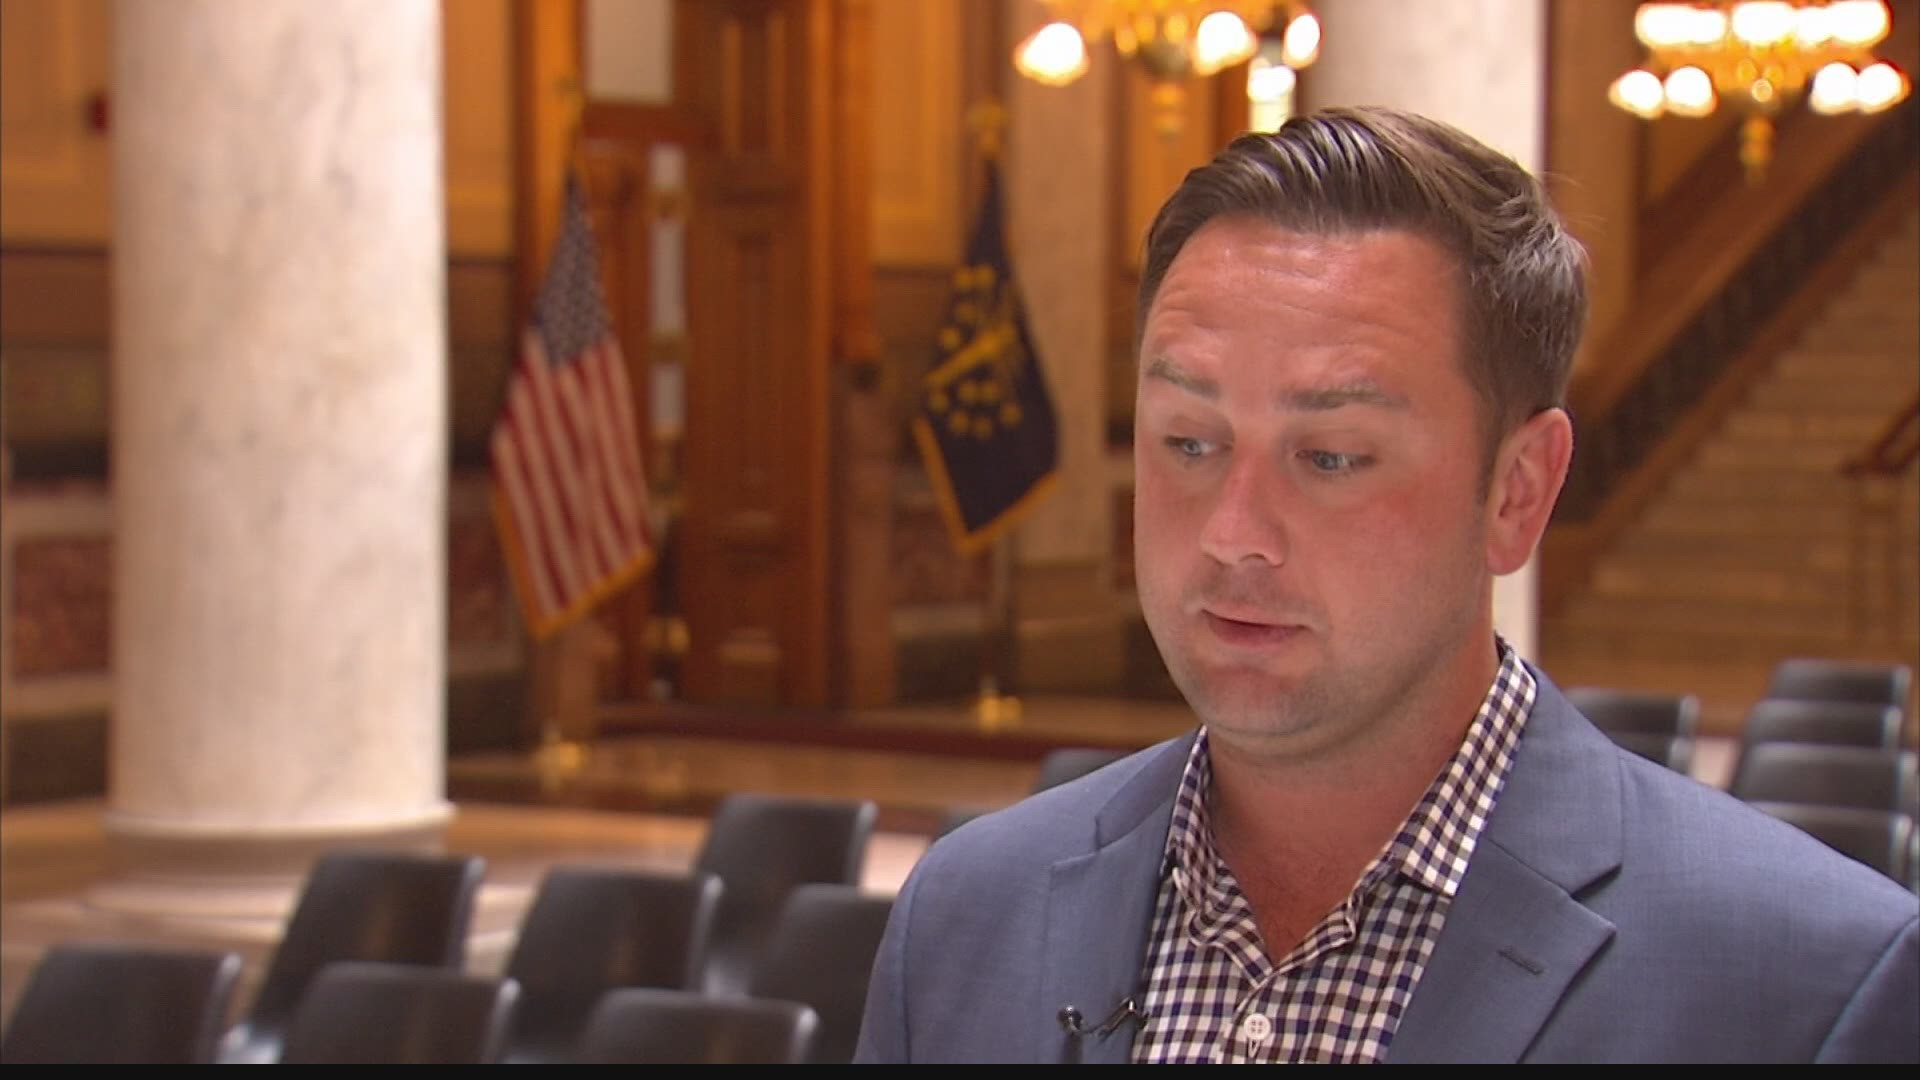 State Representative Dan Forestal has resigned just days after getting arrested for the second time in a year.